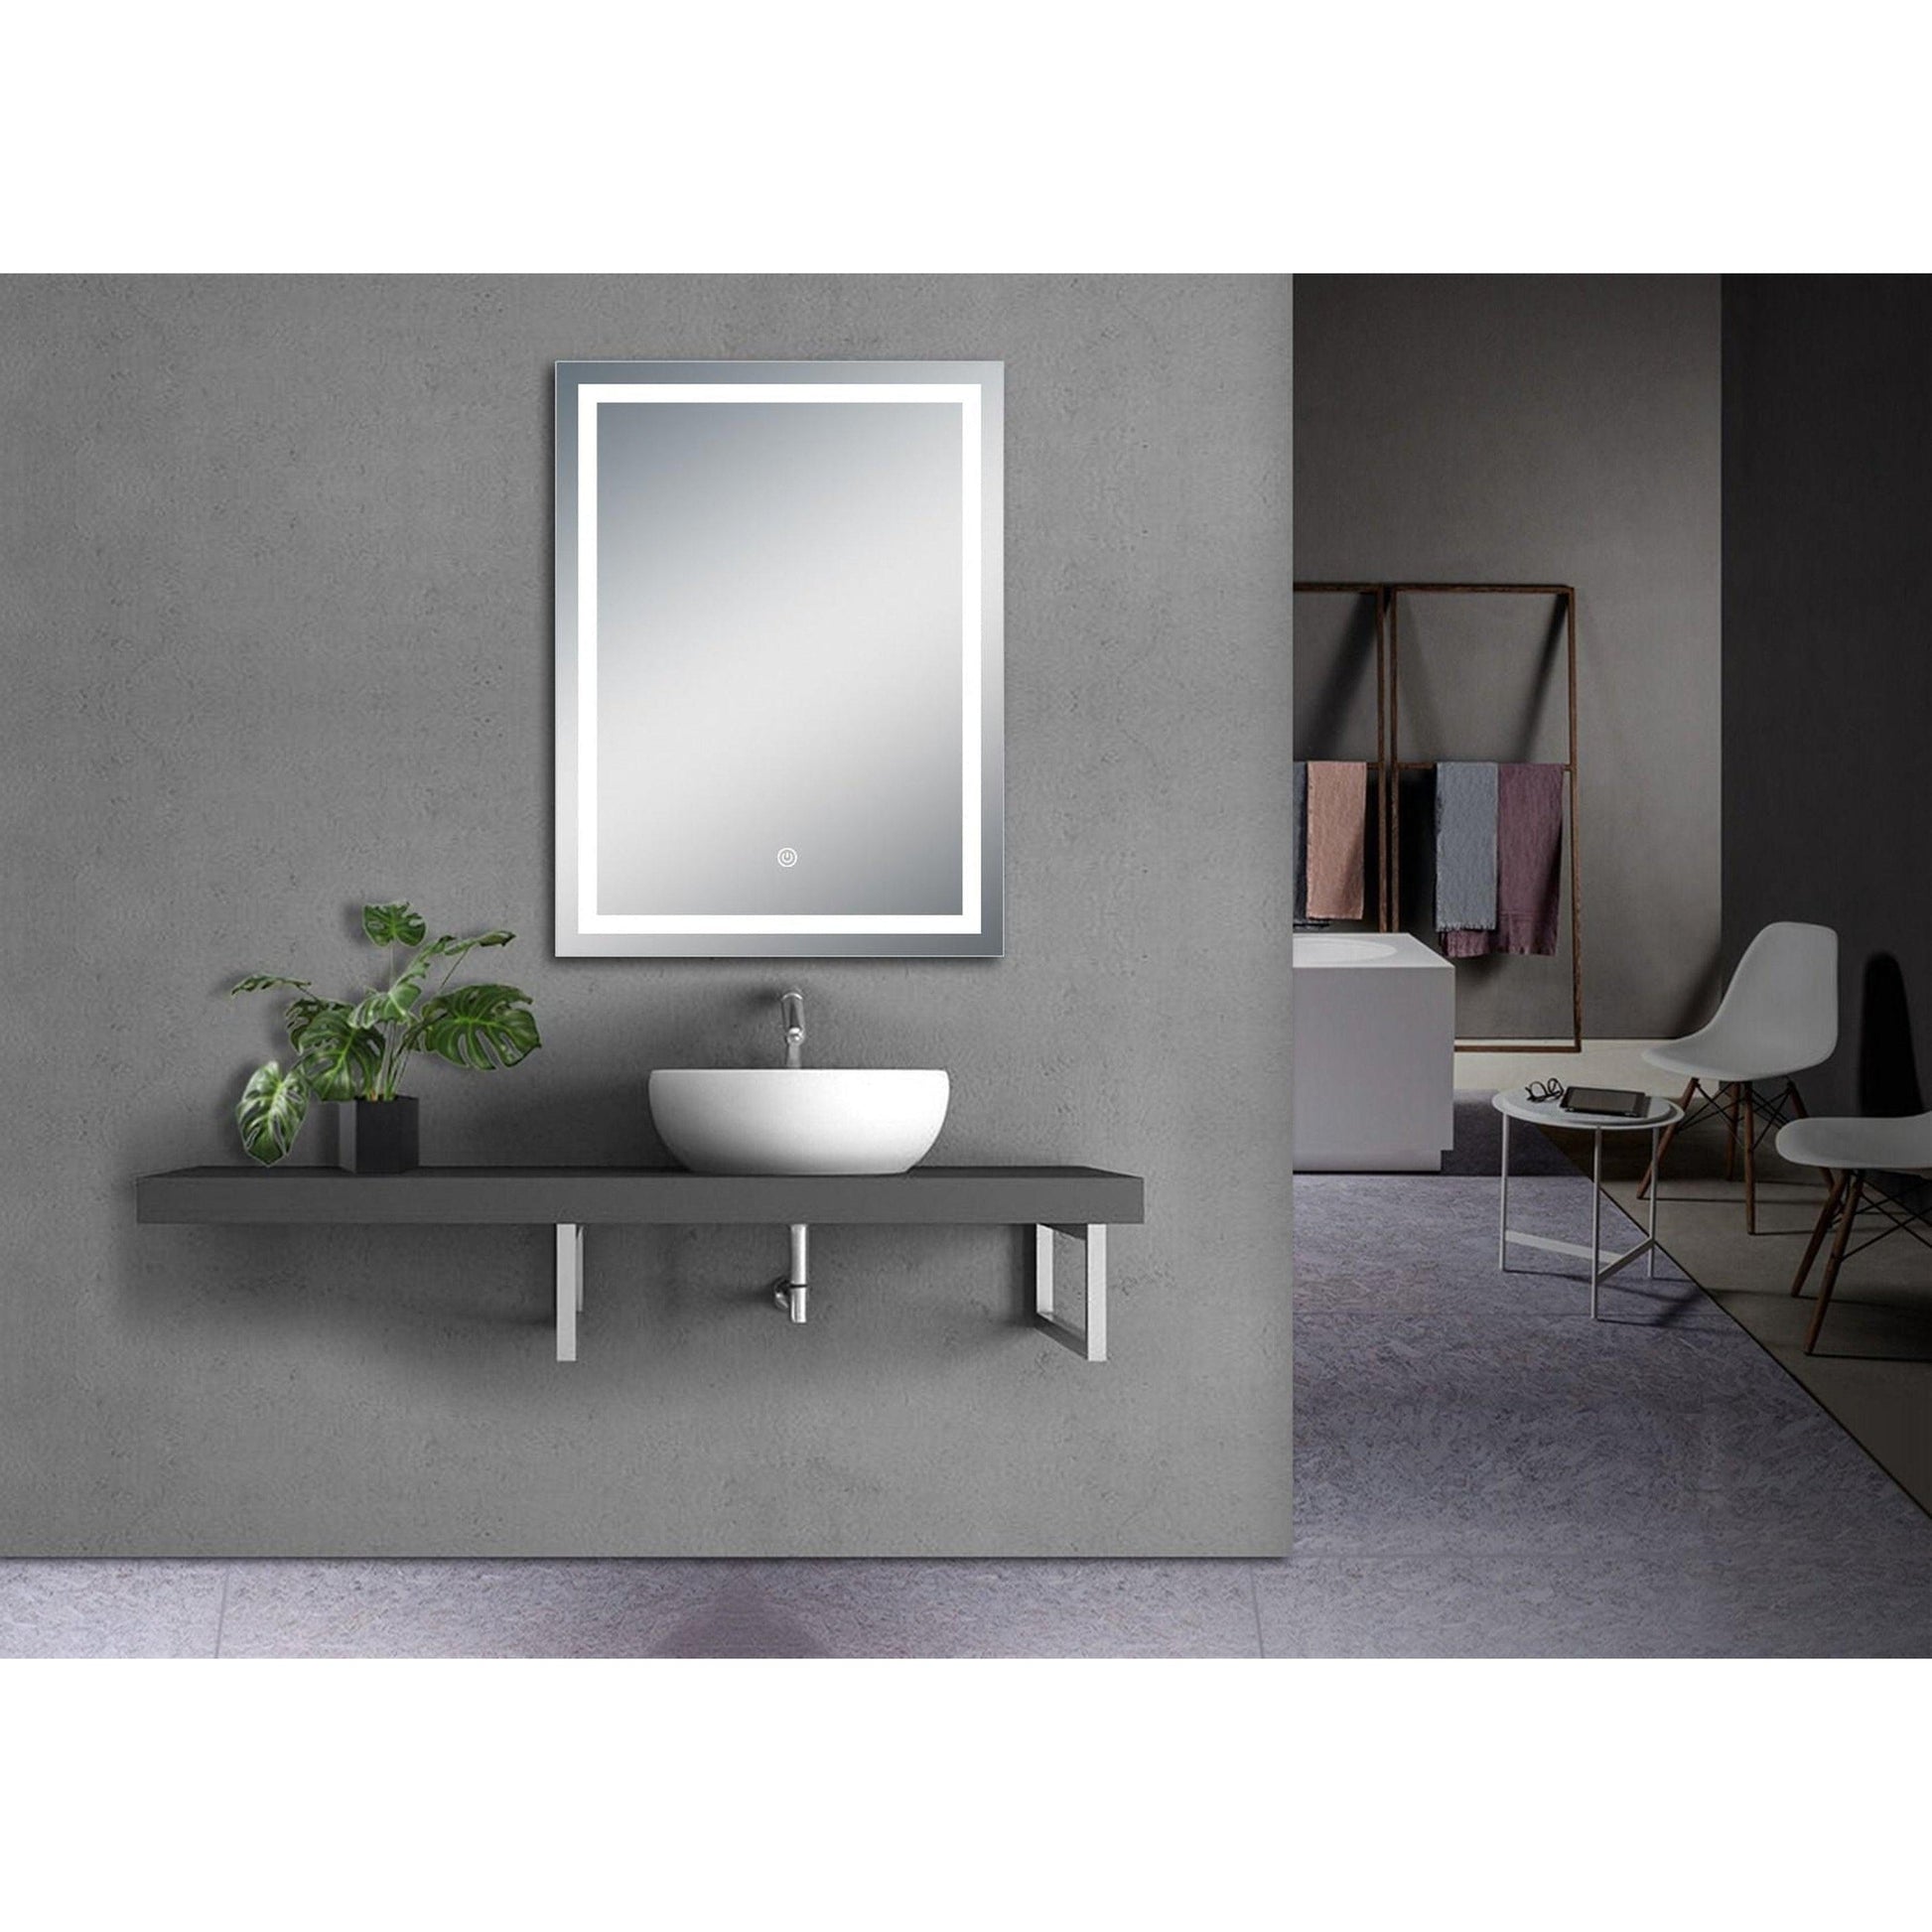 DreamWerks Riga 24" W x 32" H LED Mirror with Dimmer and Defogger